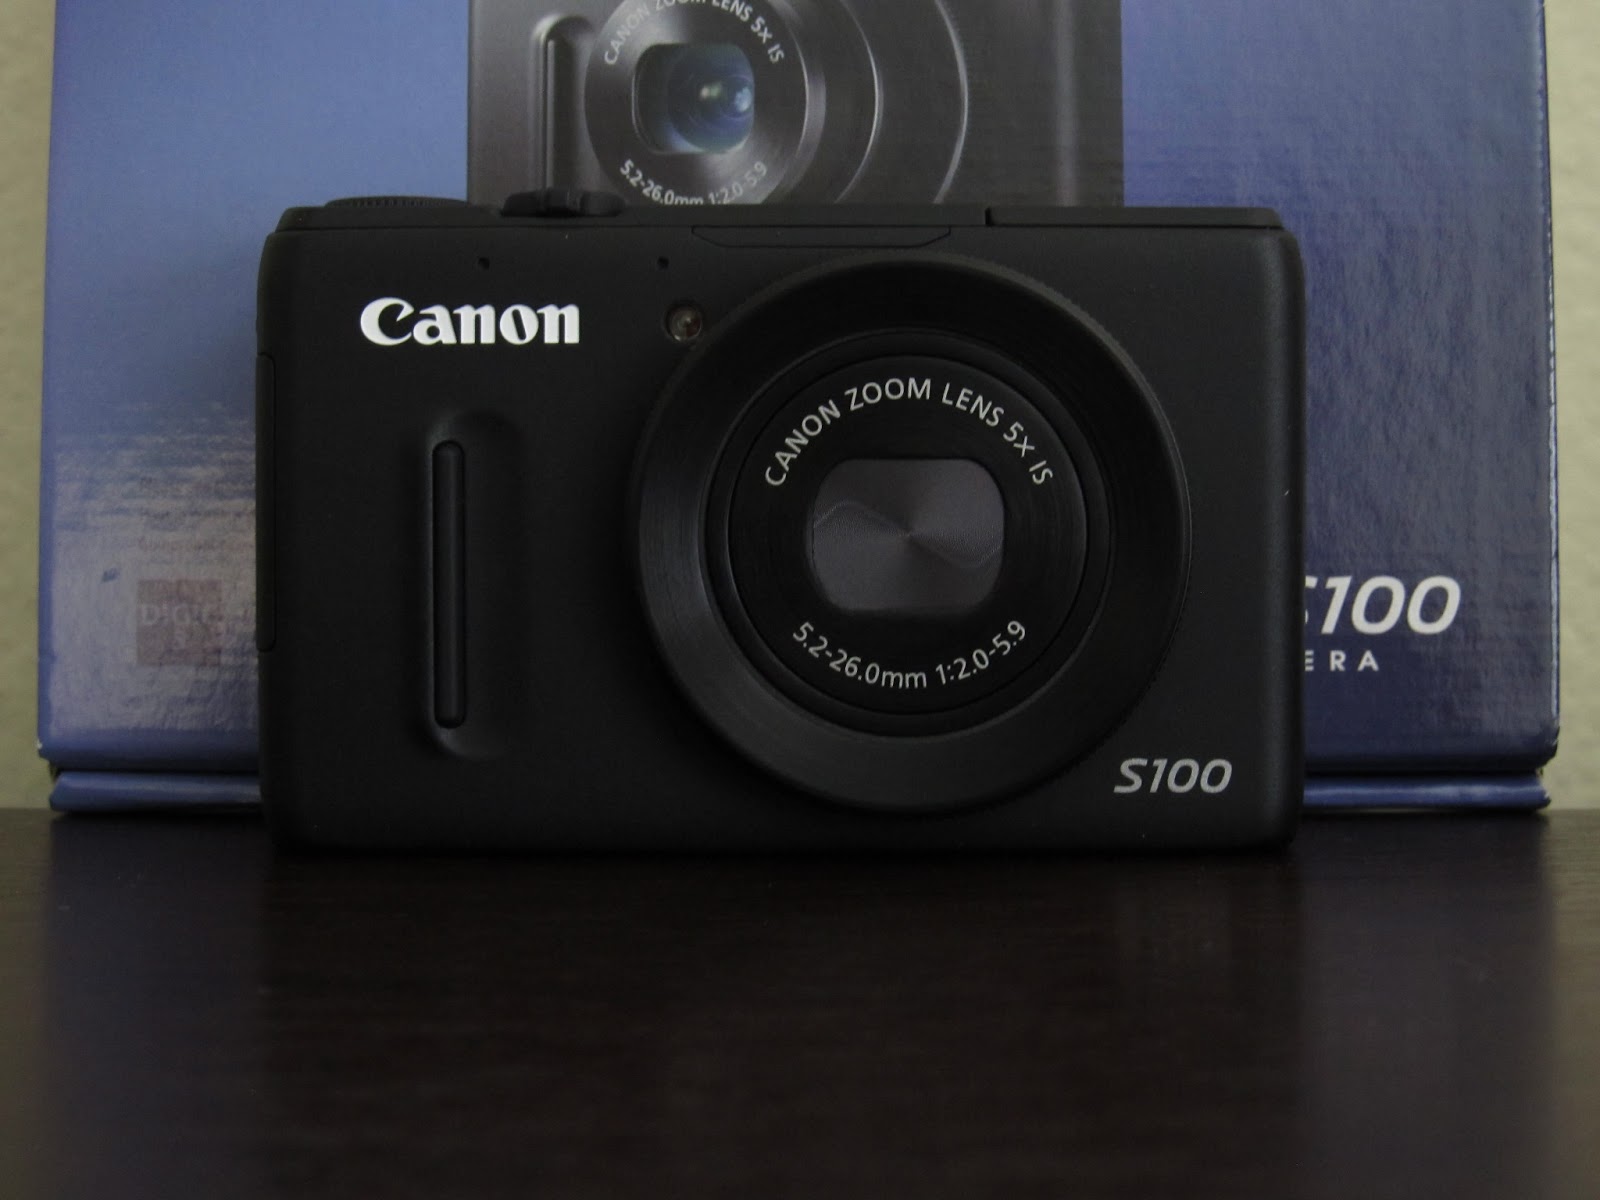 PHOTOGRAPHIC CENTRAL: Canon Powershot SX130IS- Review